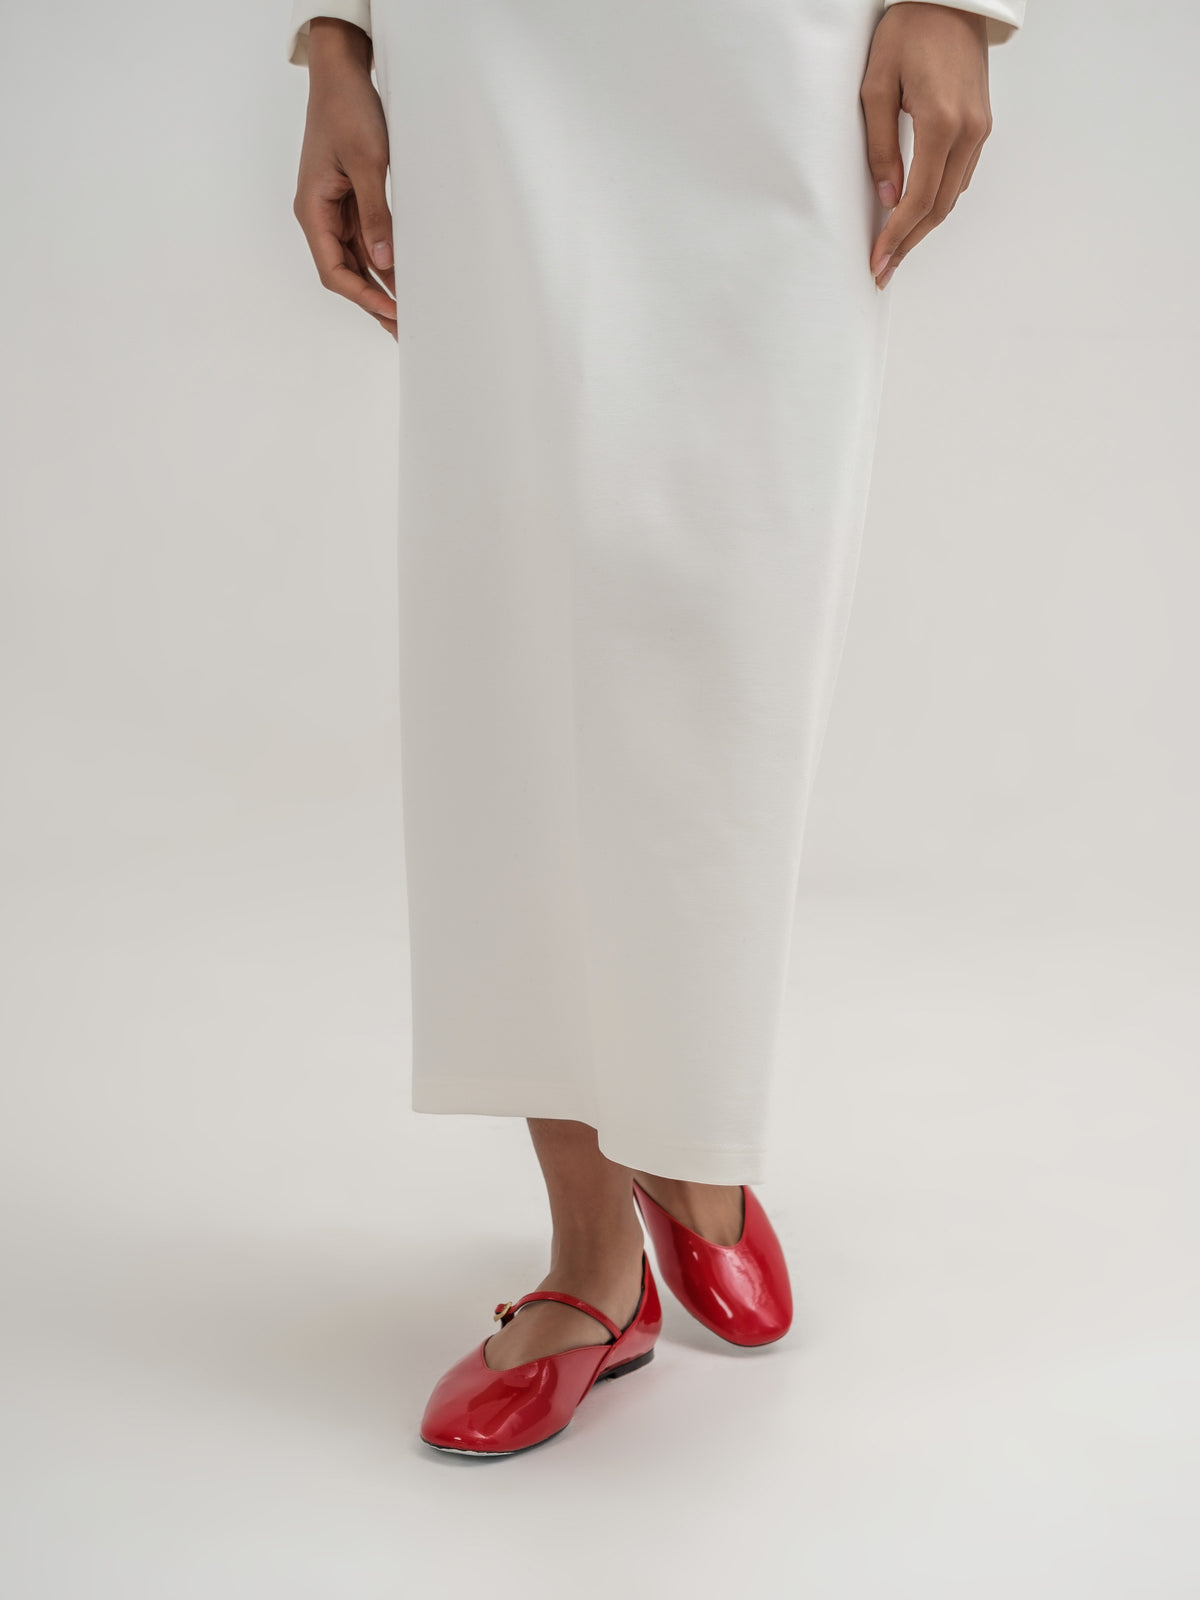 White straight long skirt with slit on the back